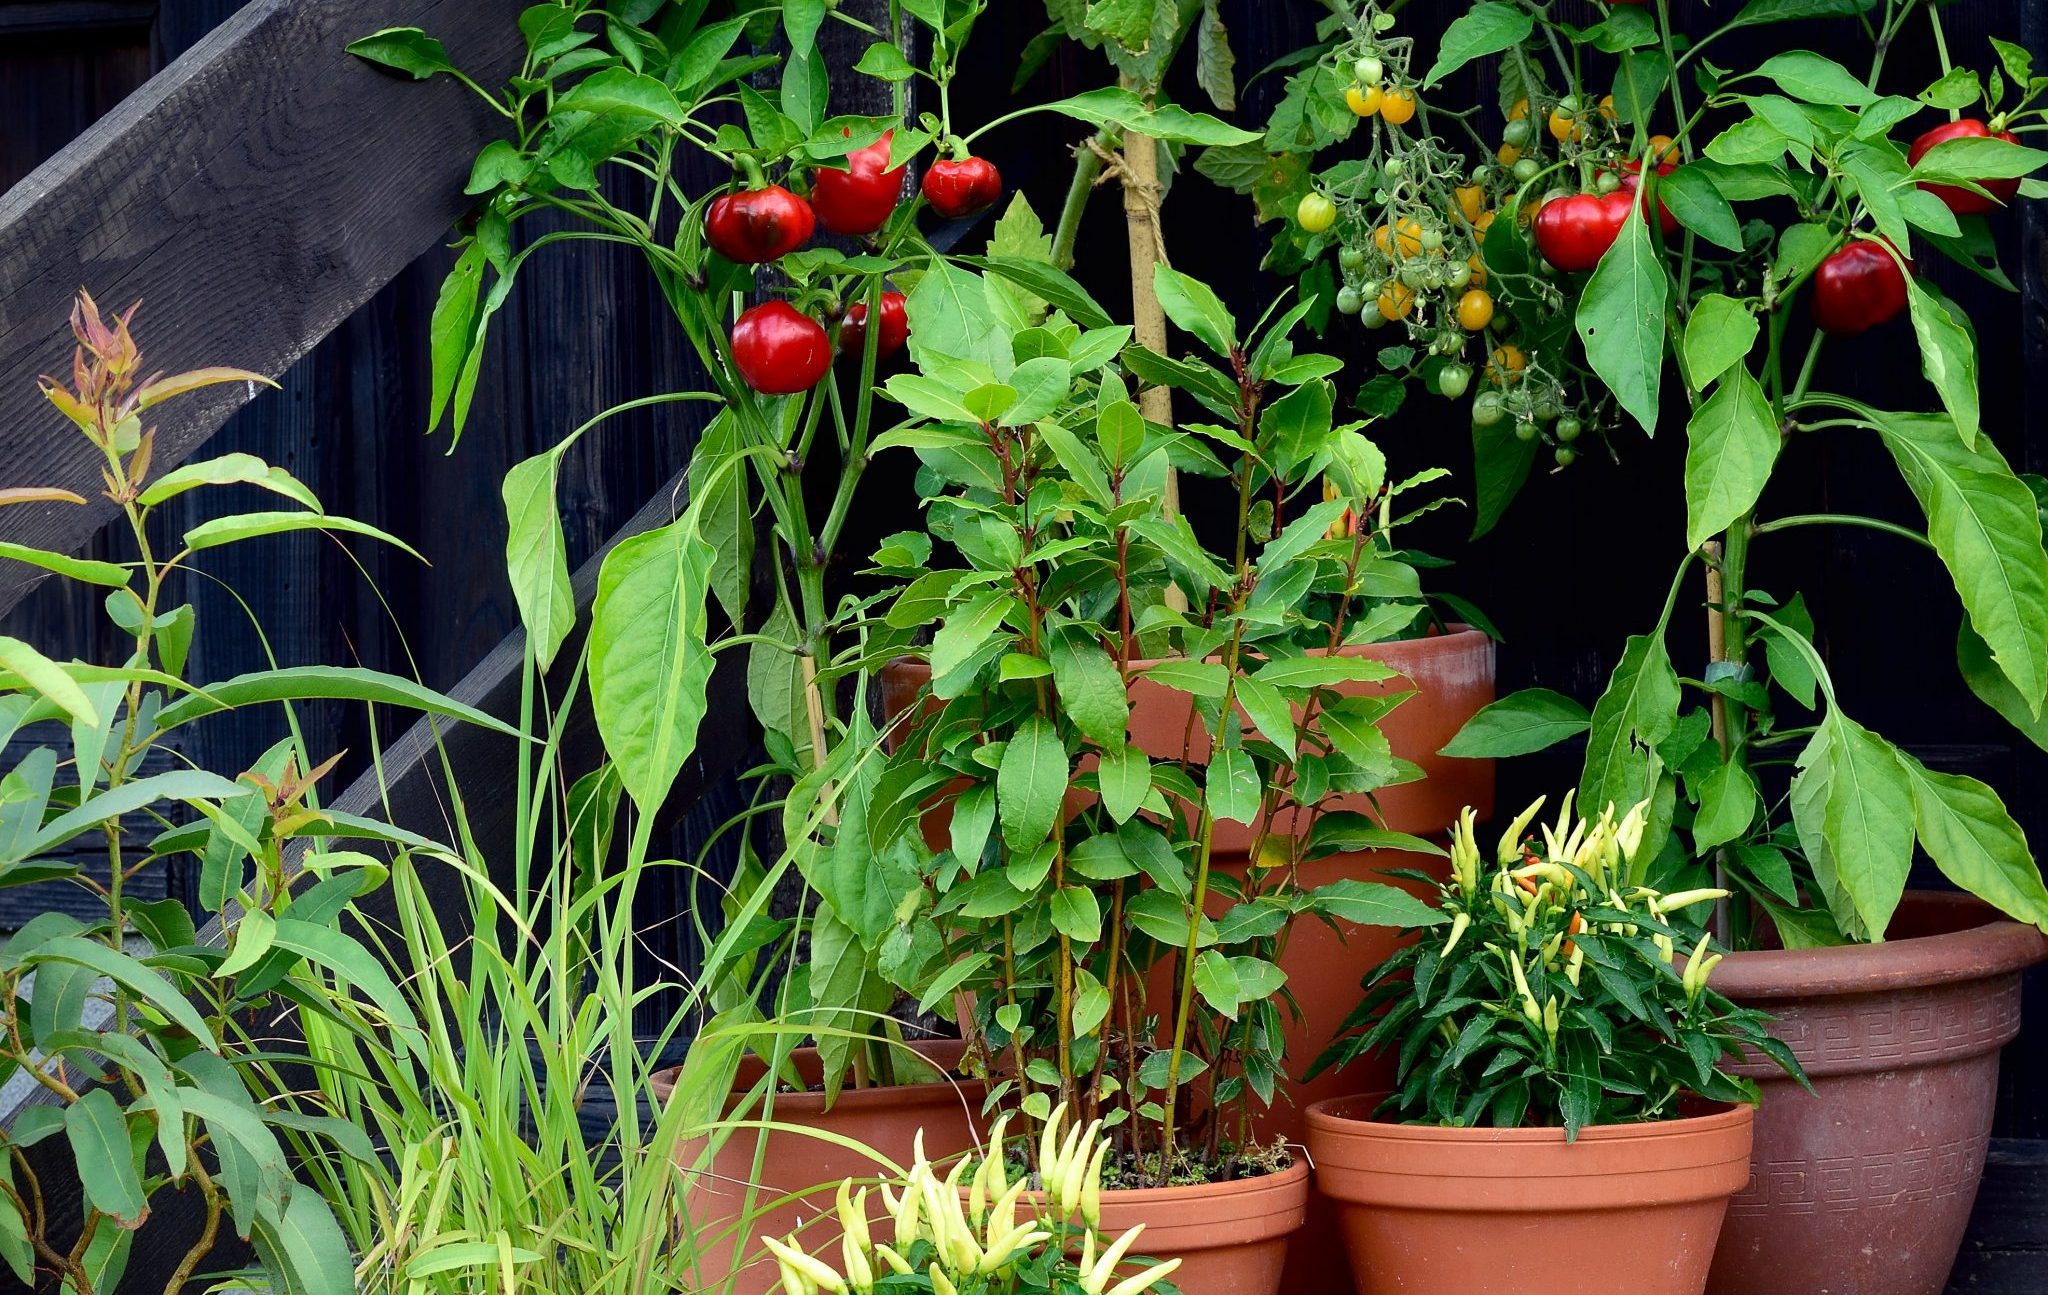 A grouping of 8 edible plants grown in containers and pots on the steps of an urban home: tomatoes, peppers, lemon grass.